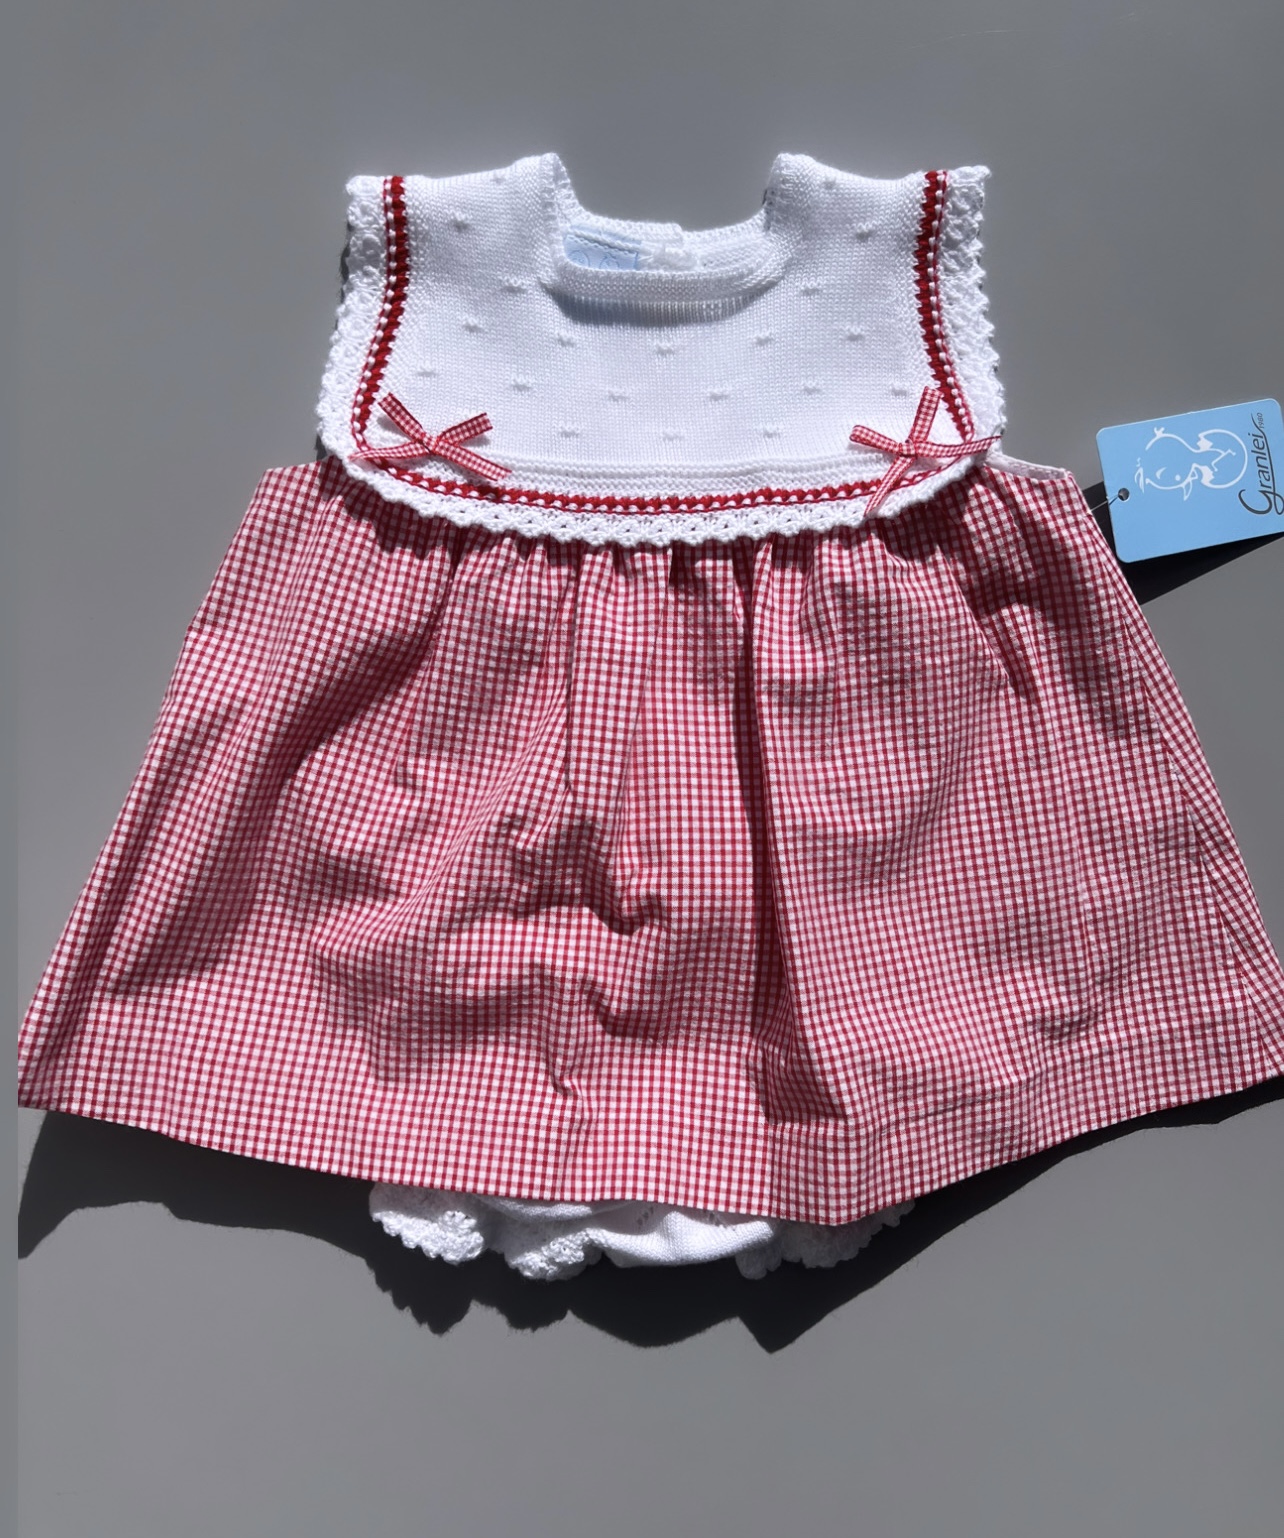 Granlei Girls Red Gingham Dress with White Knickers